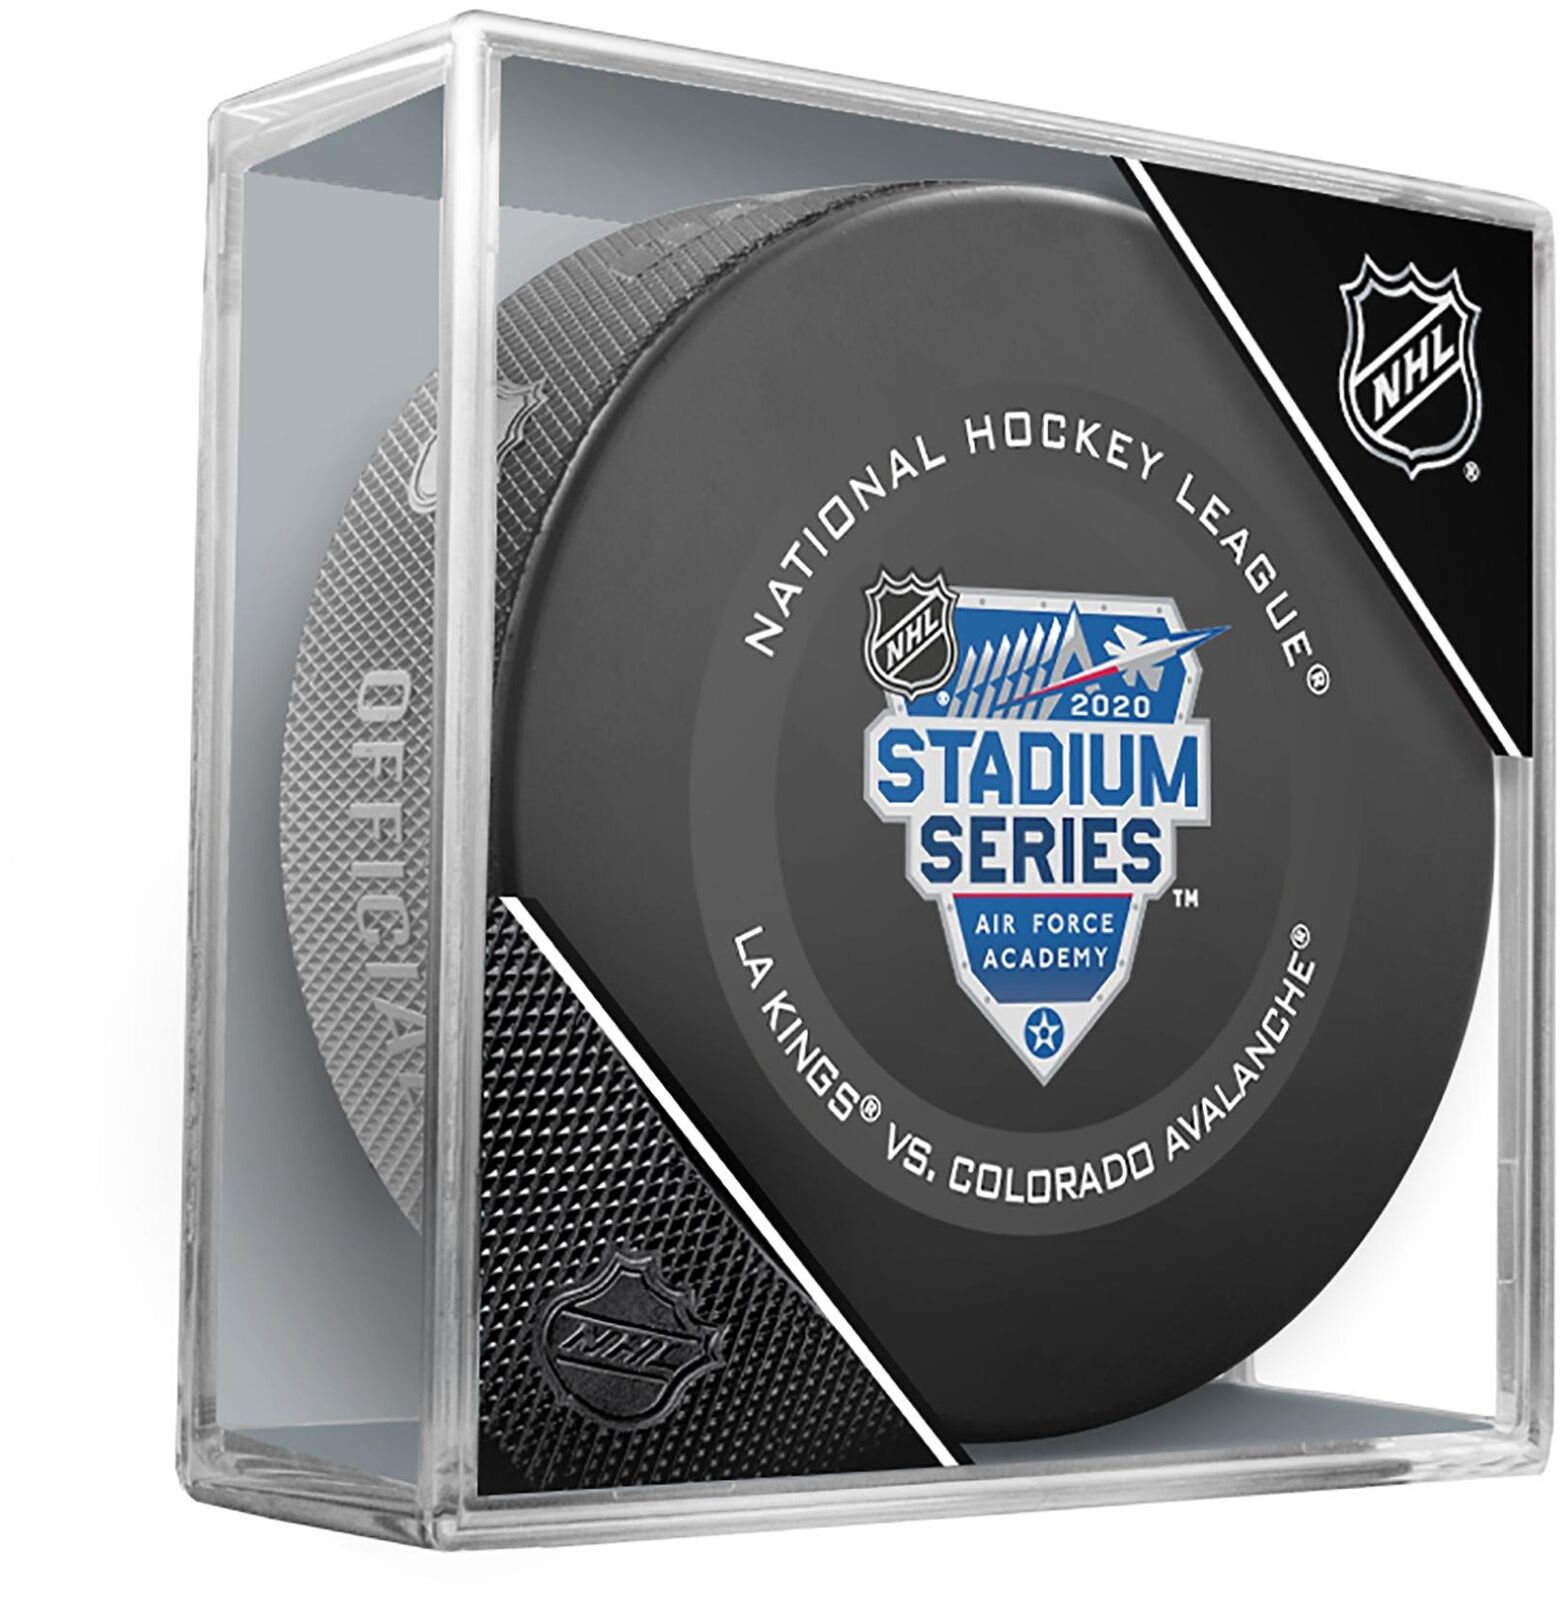 Los Angeles Kings Vs Colorado Avalanche 2020 Stadium Series Official Game Puck